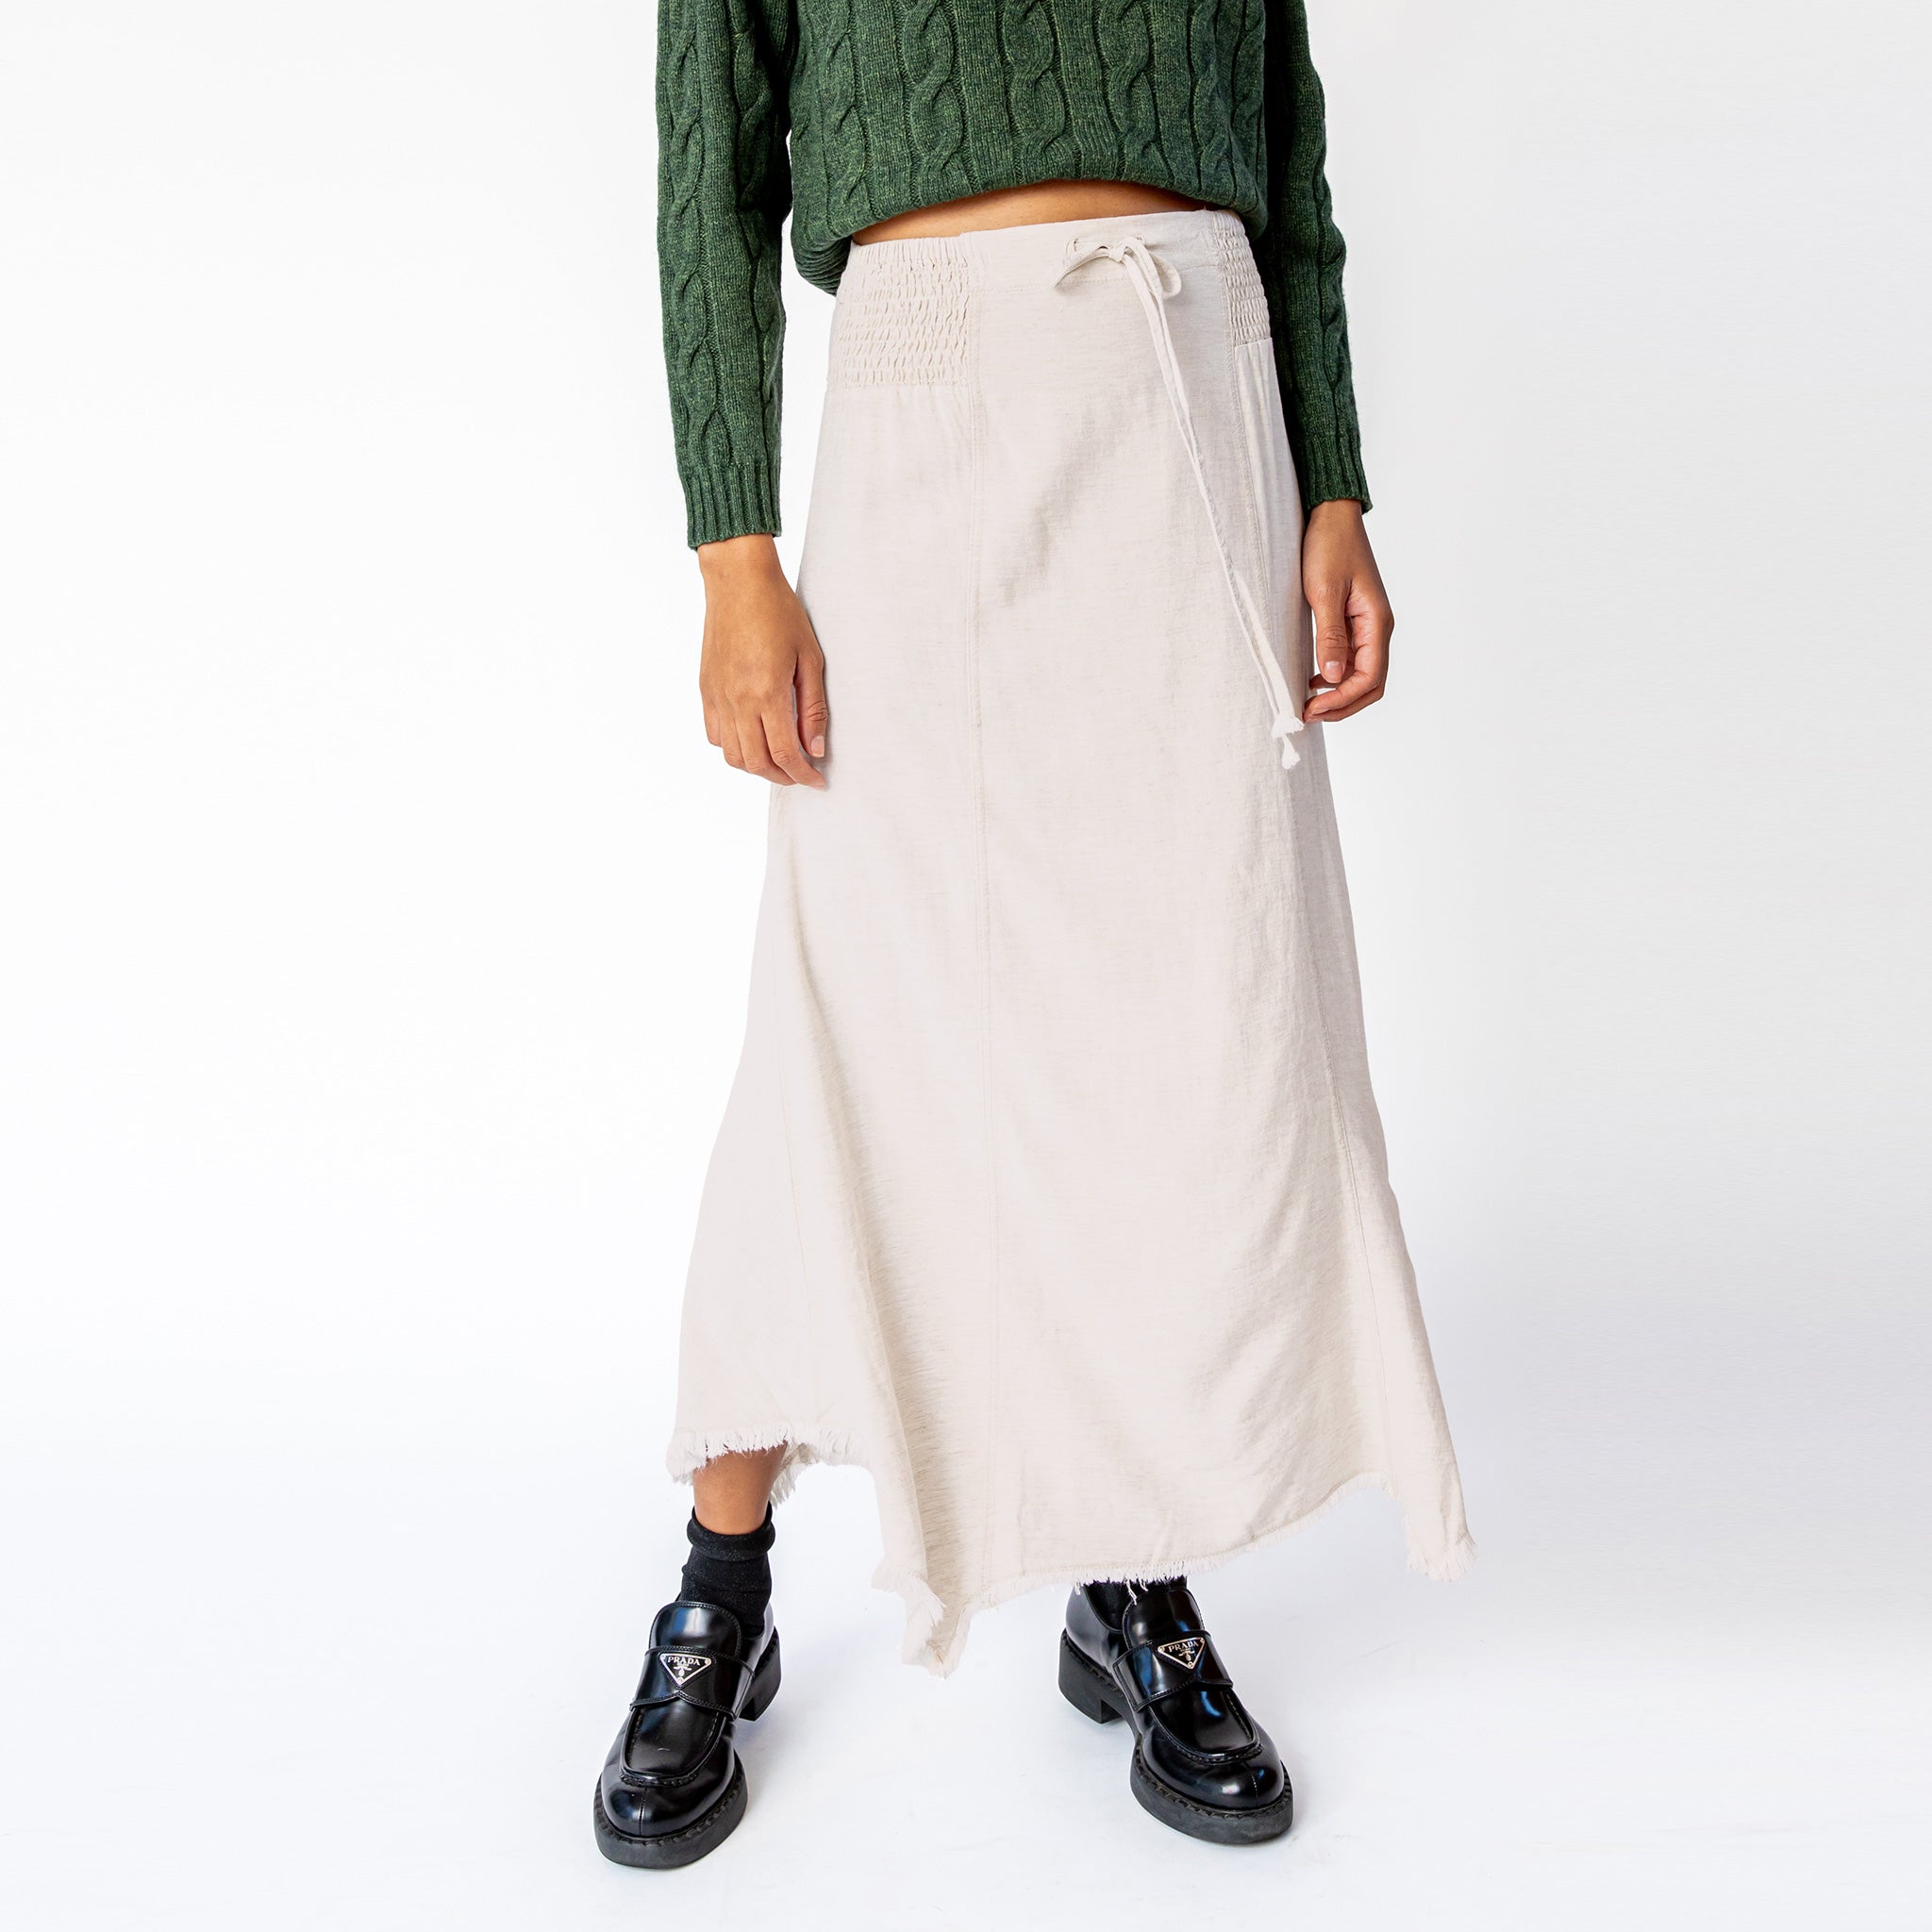 A close up of a model wearing Misc Etc's smocked linen midi skirt in sand, featuring a smocked elastic waistband with drawstring and an asymmetrical hem, paired here with a green cable knit sweater and black loafers.